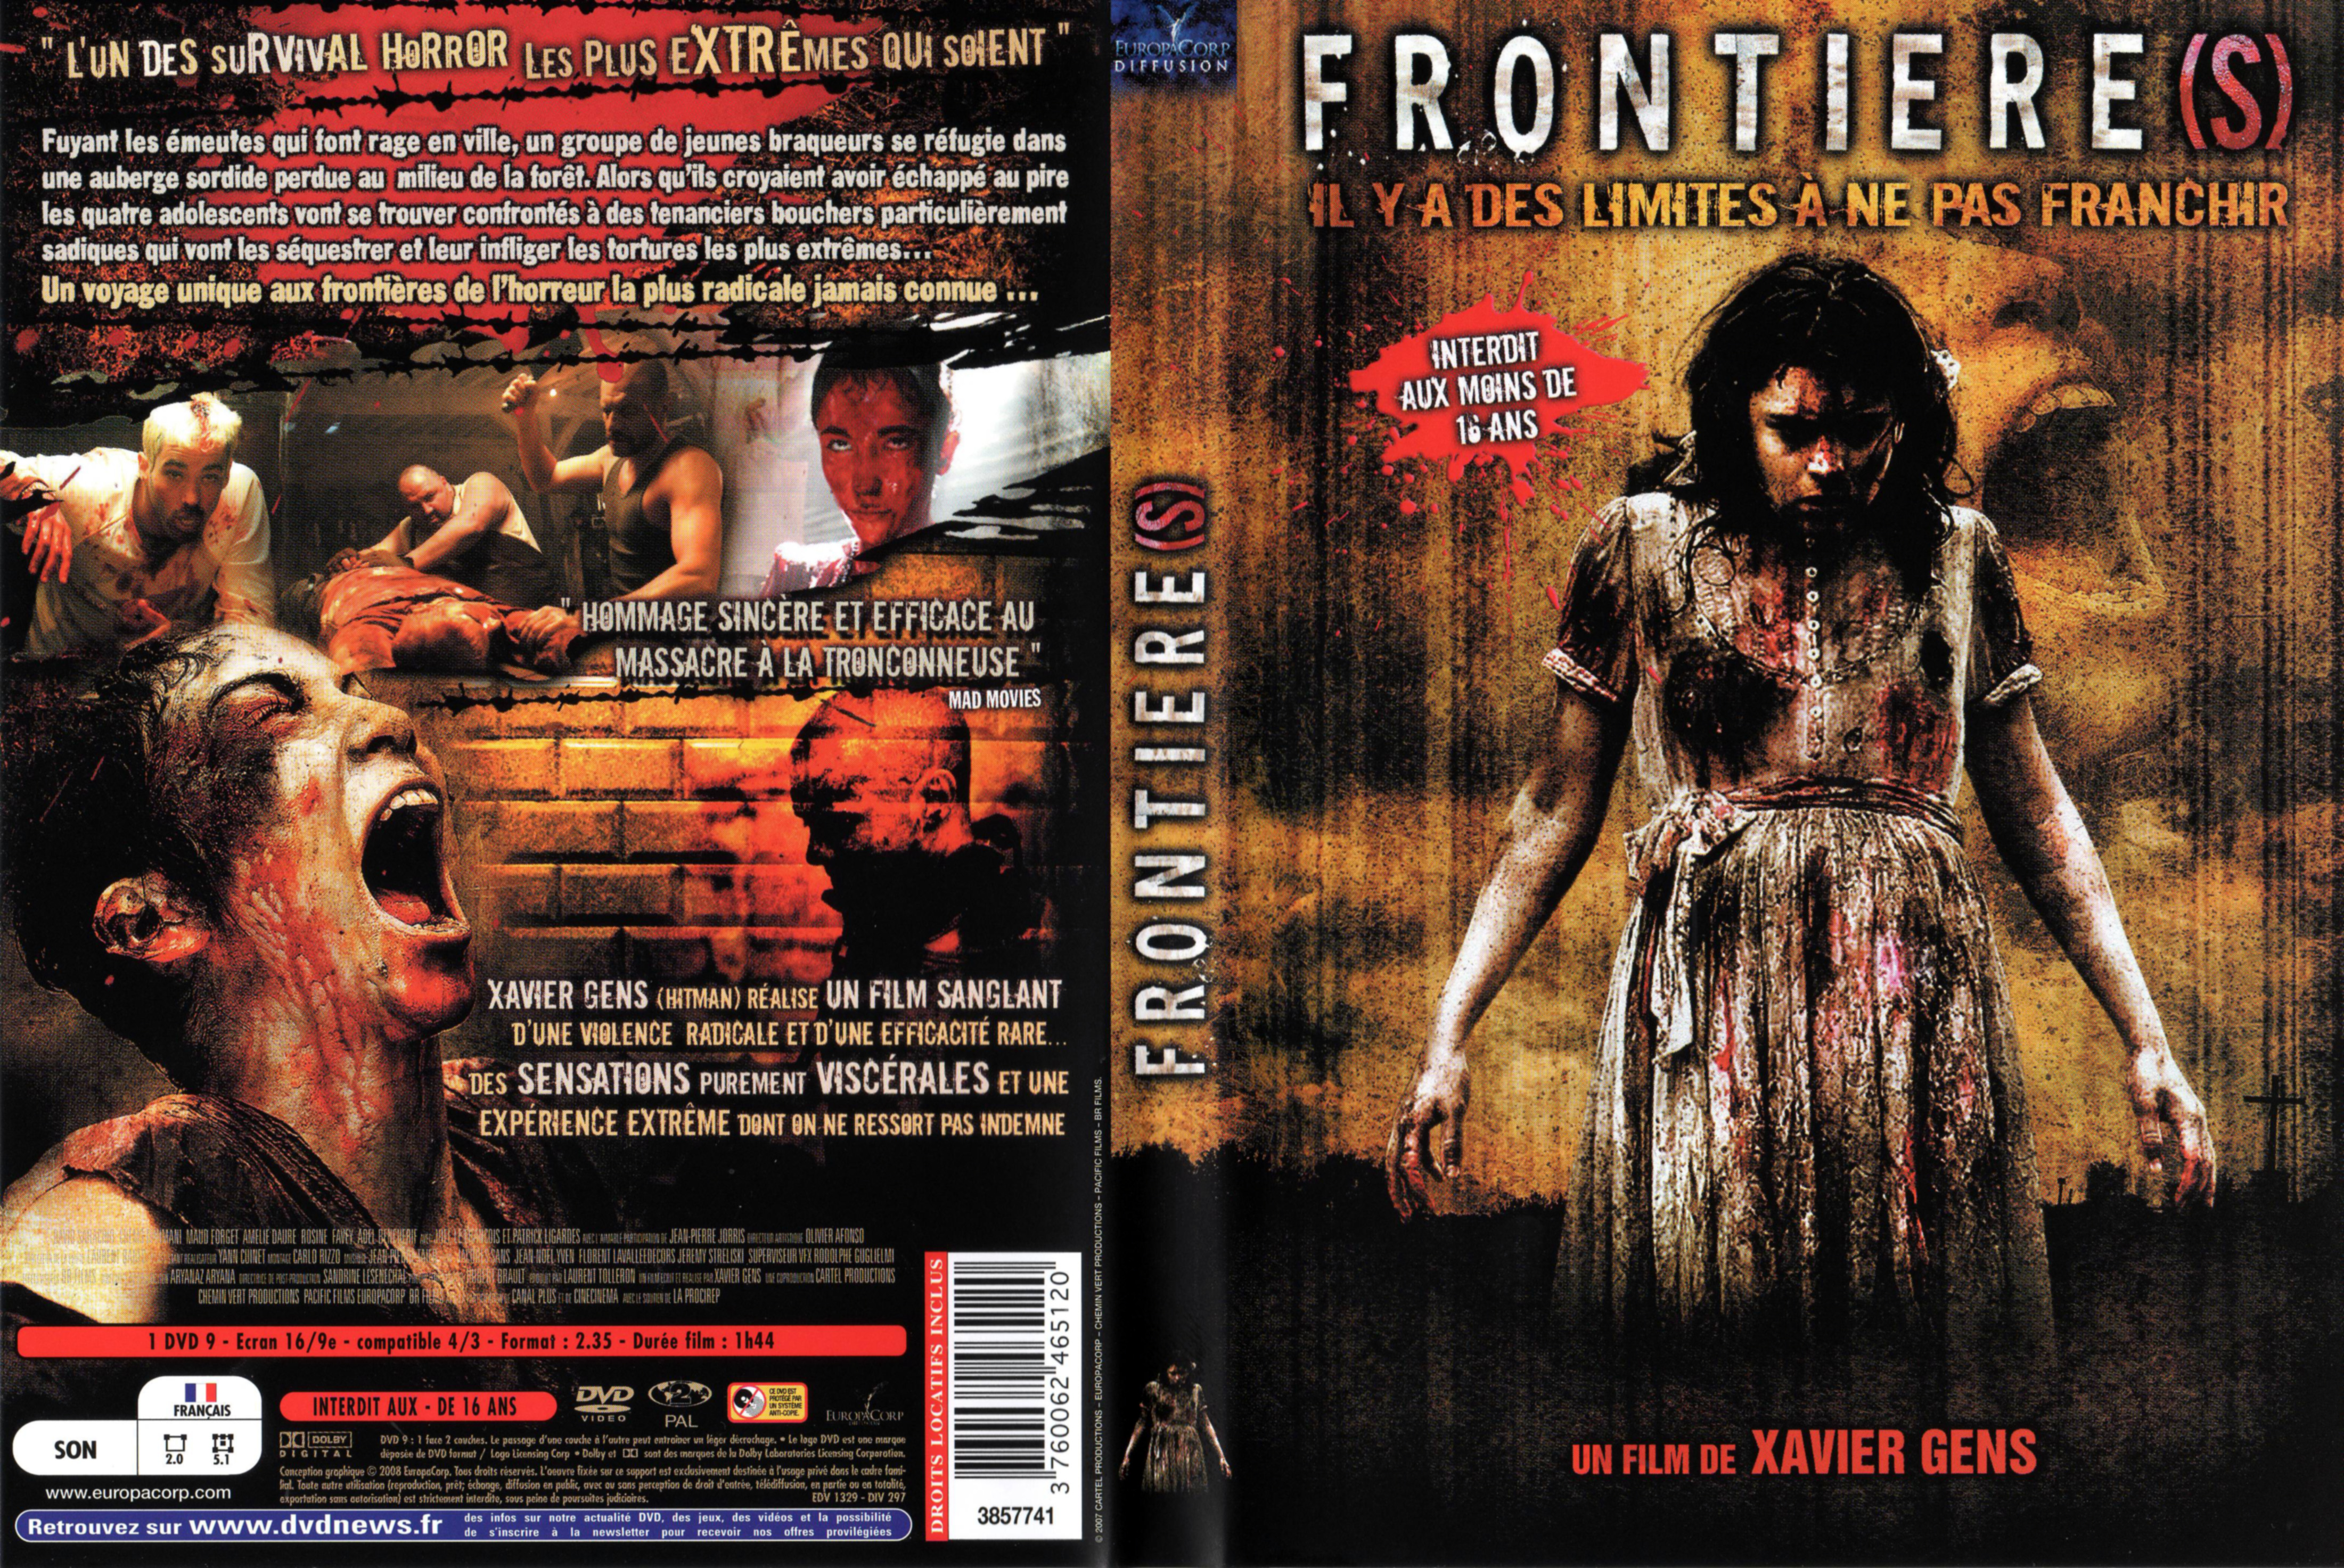 Jaquette DVD Frontieres